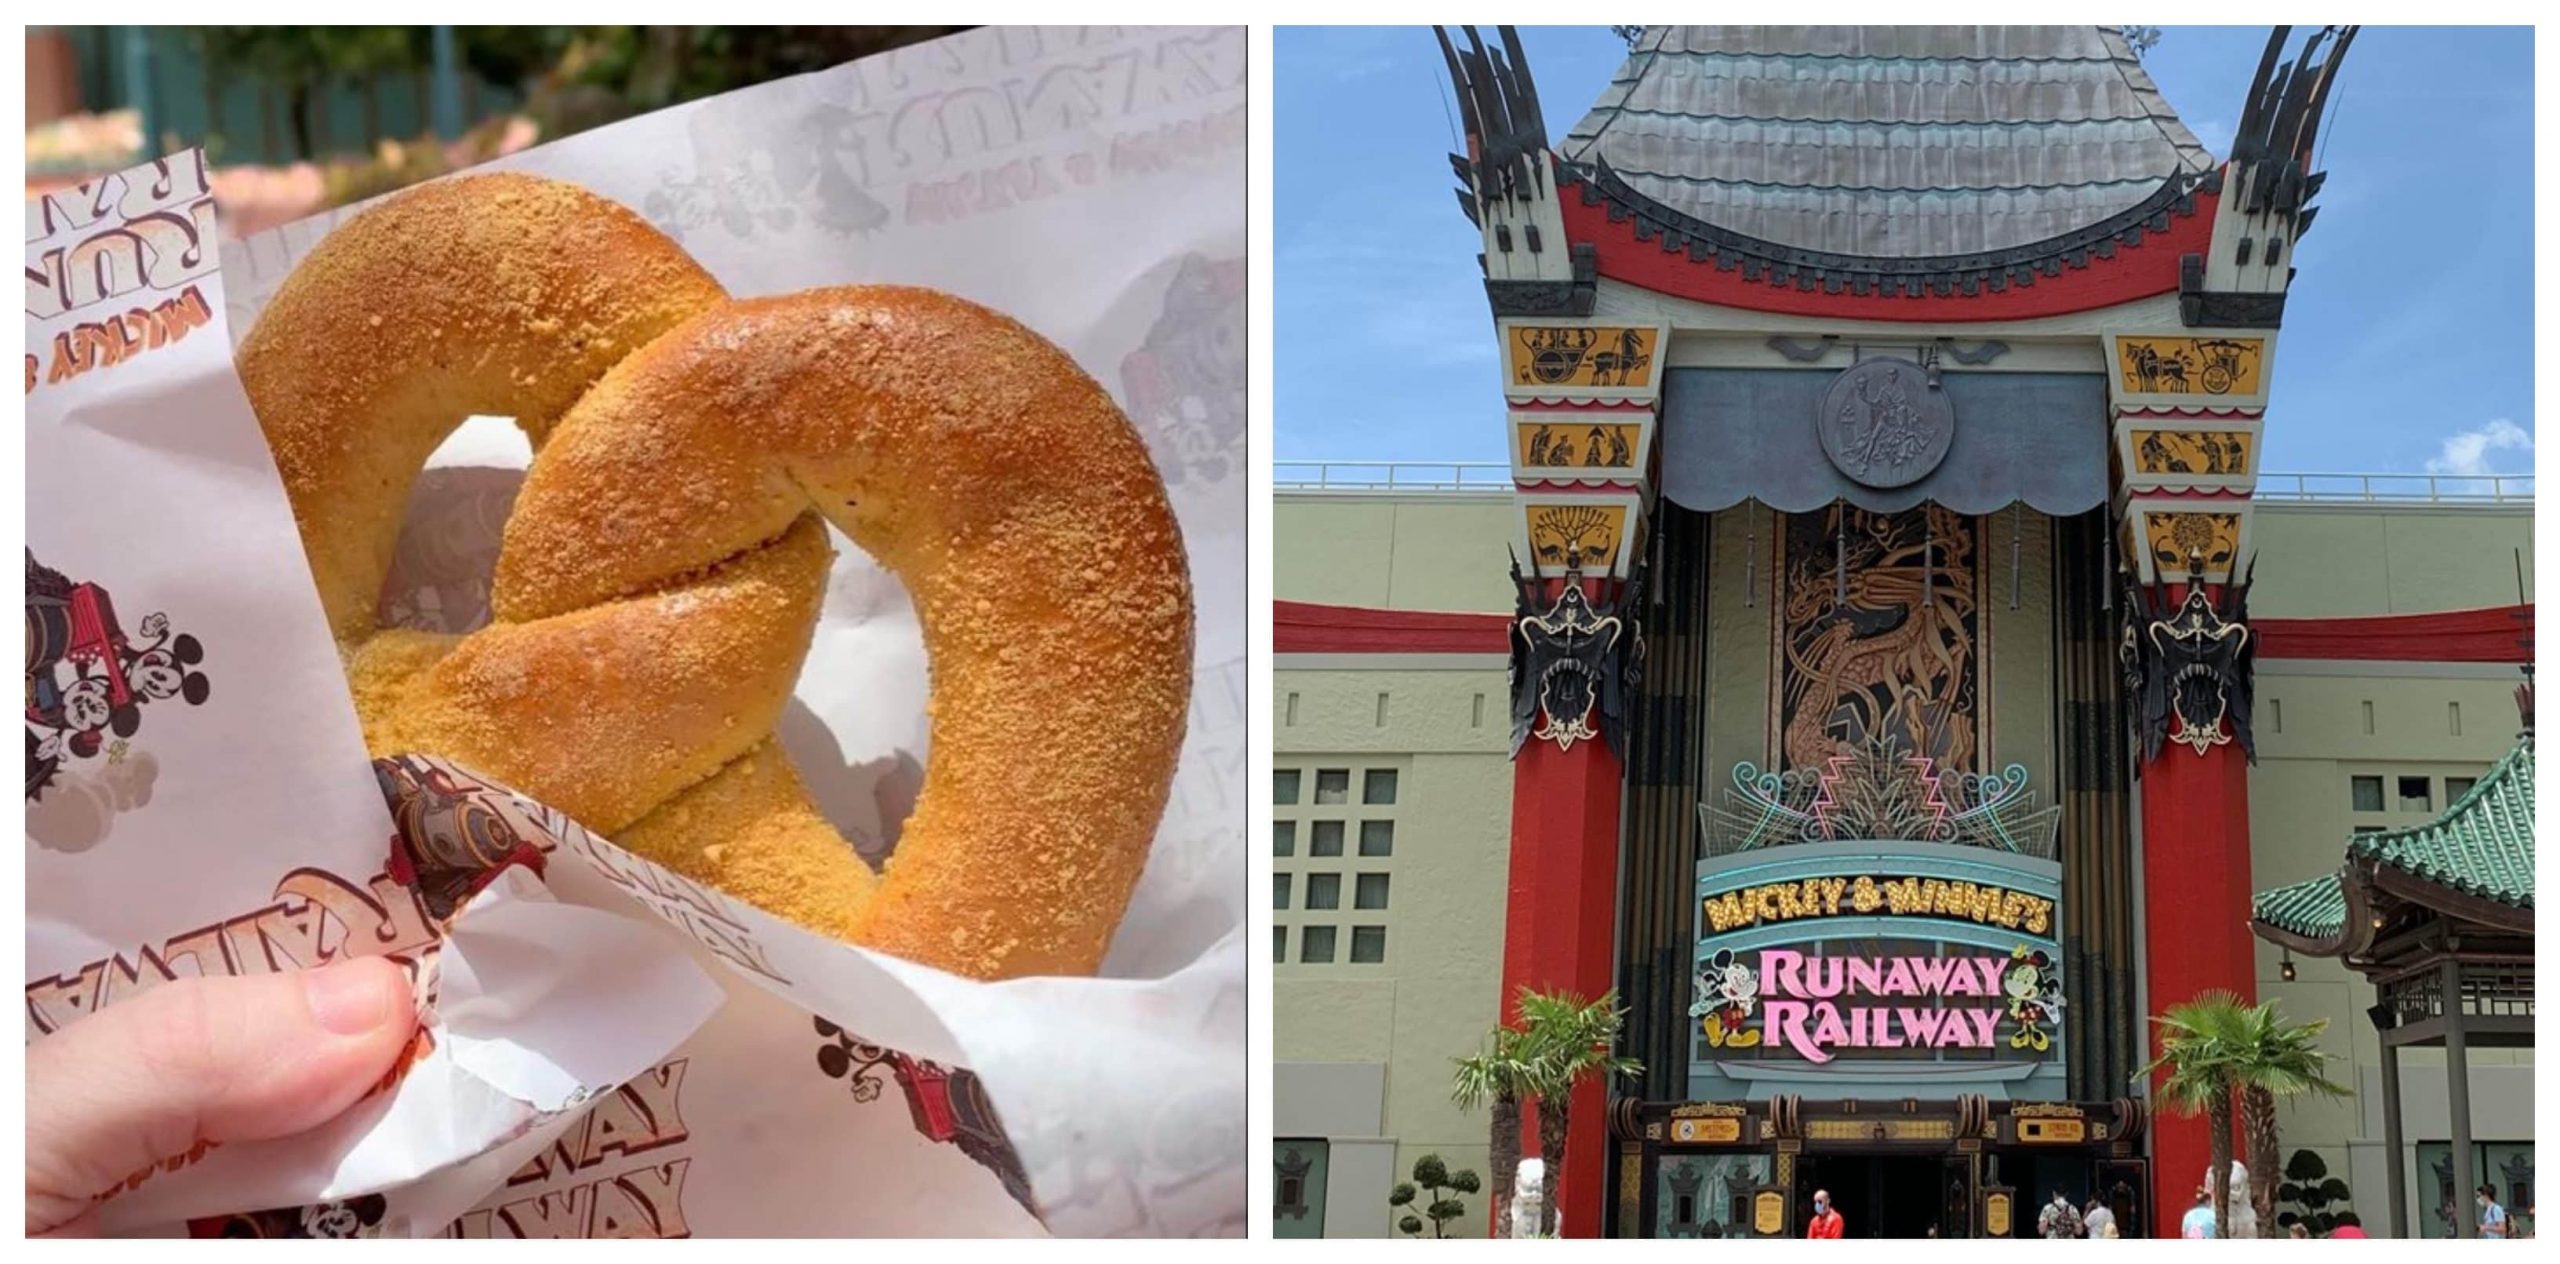 Cream Cheese Pretzels are Back at Hollywood Studios